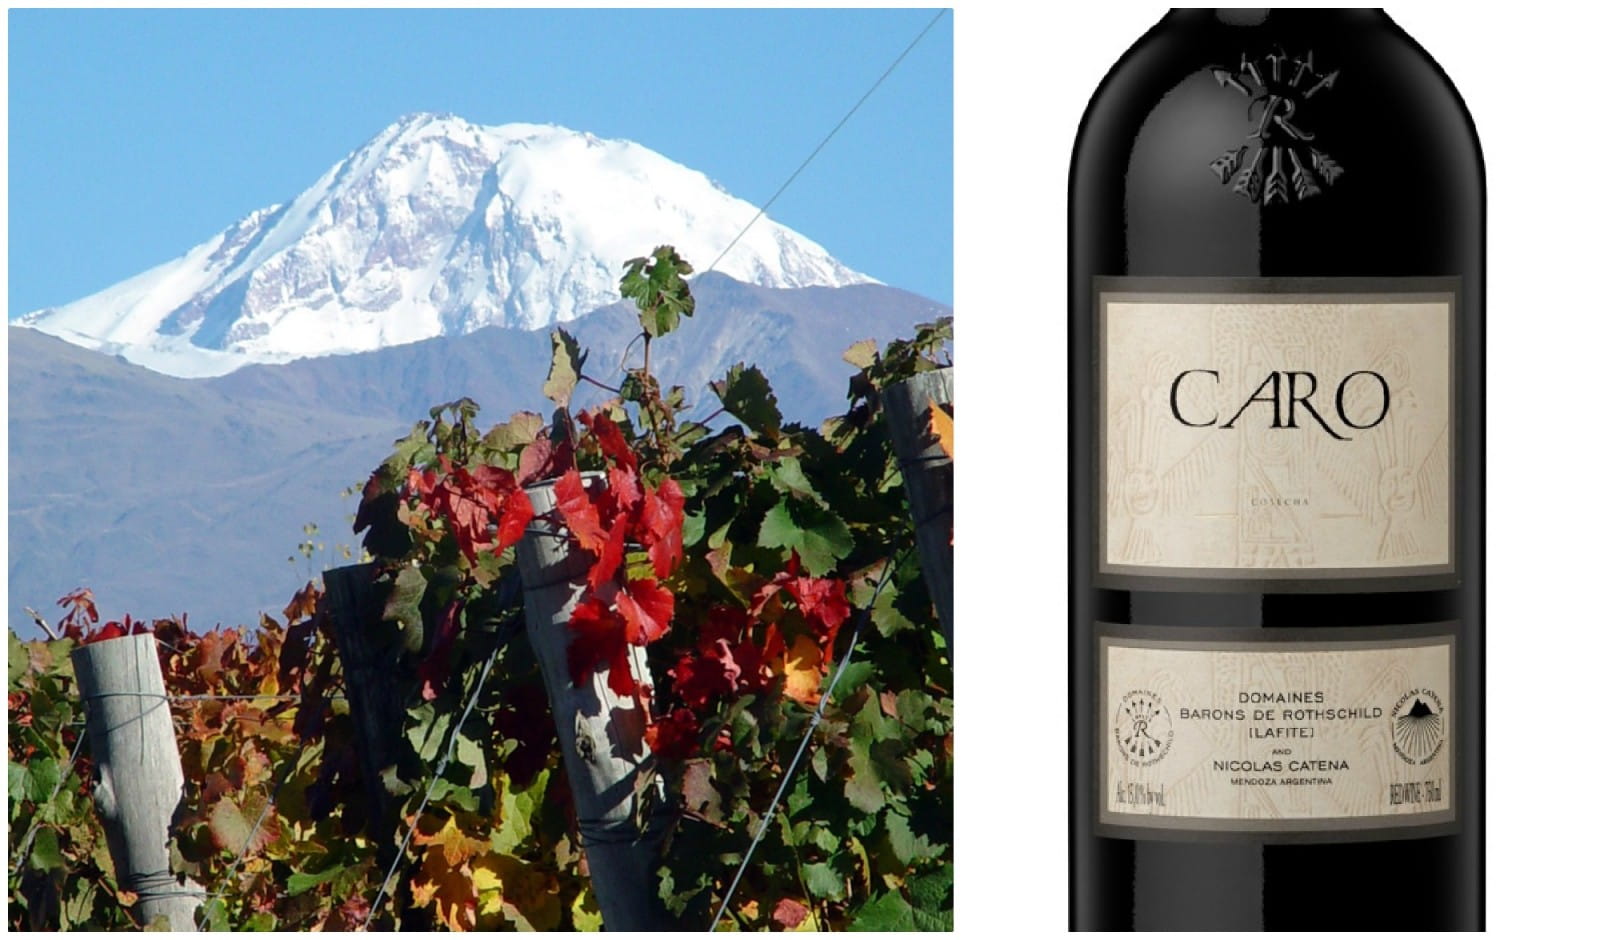 Win a case of Caro - one of Argentina’s finest red wines